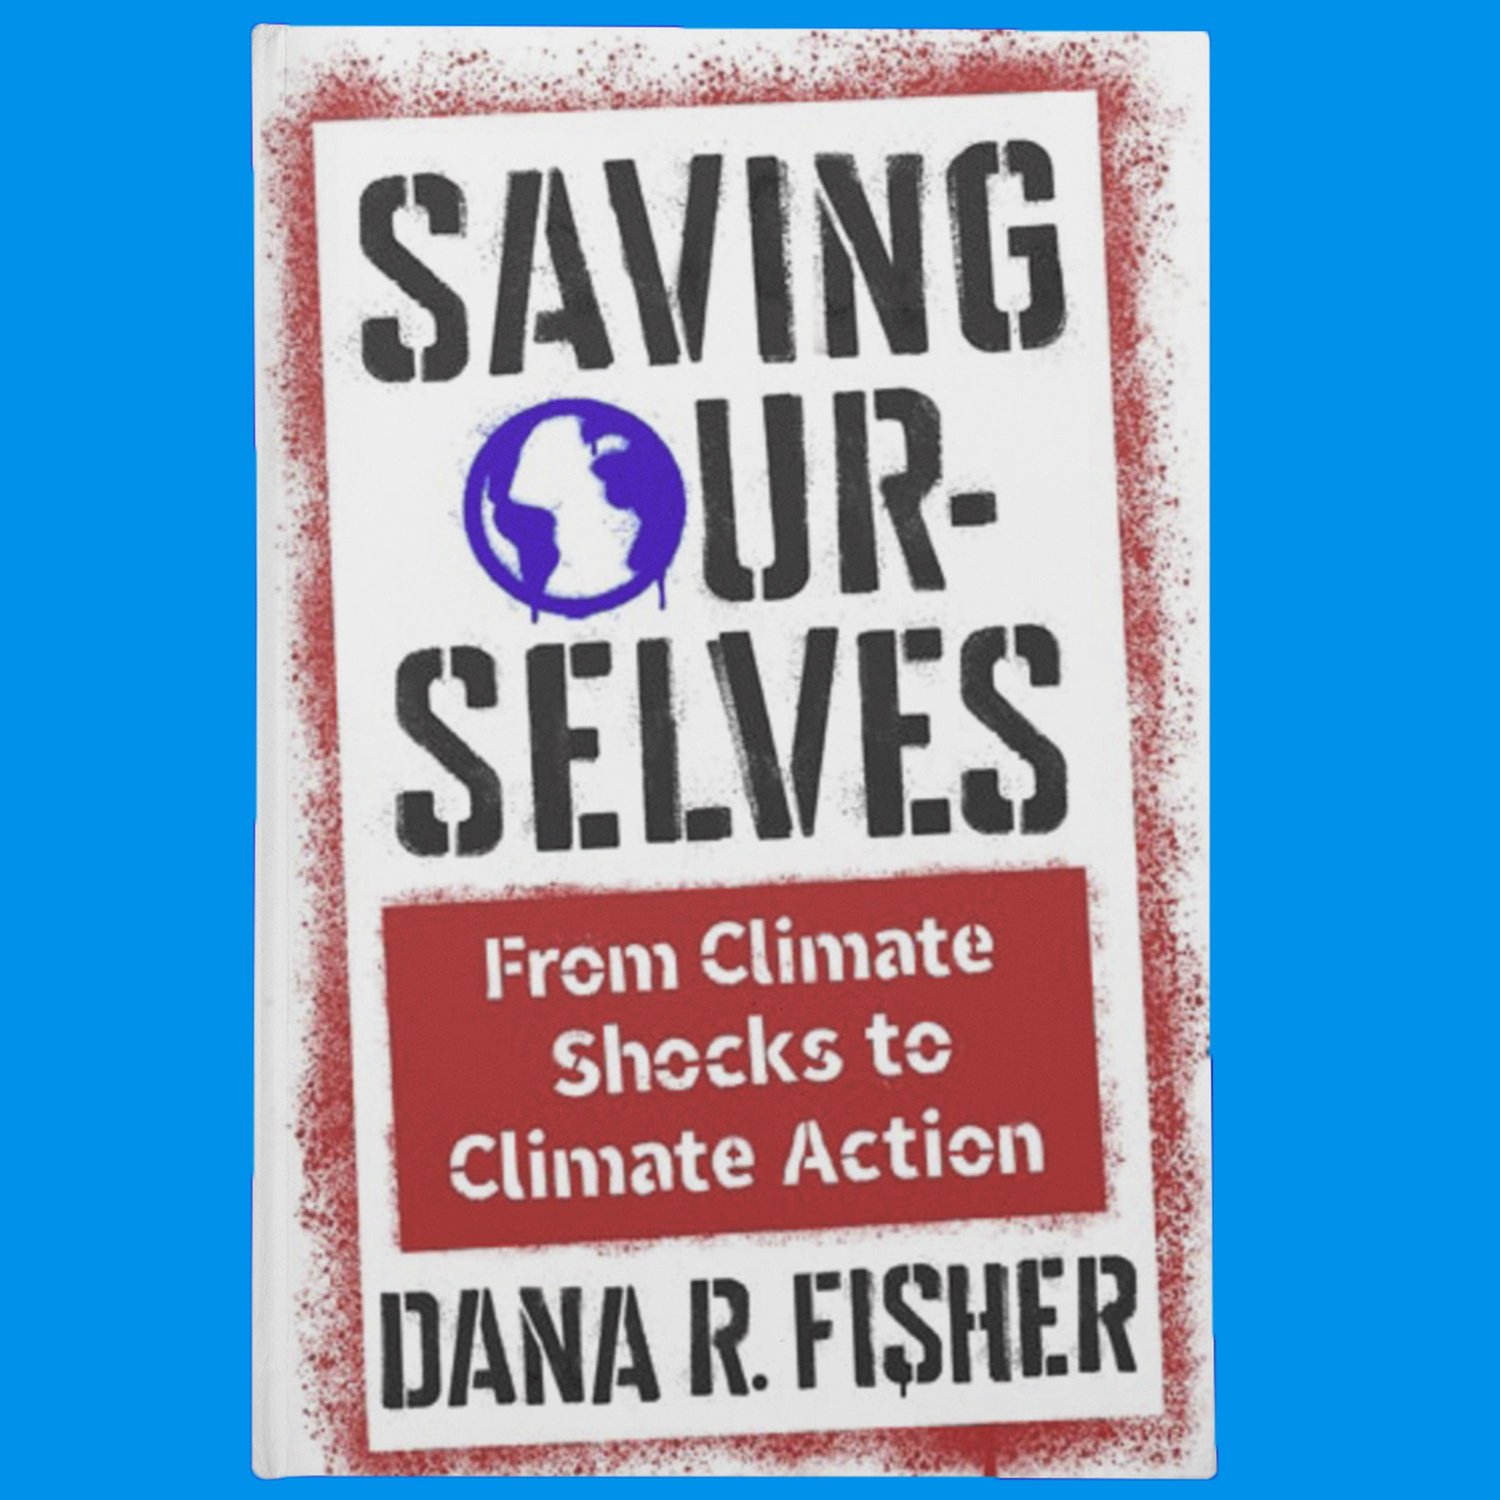 Saving Ourselves: From Climate Shocks to Climate Action - DANA FISHER